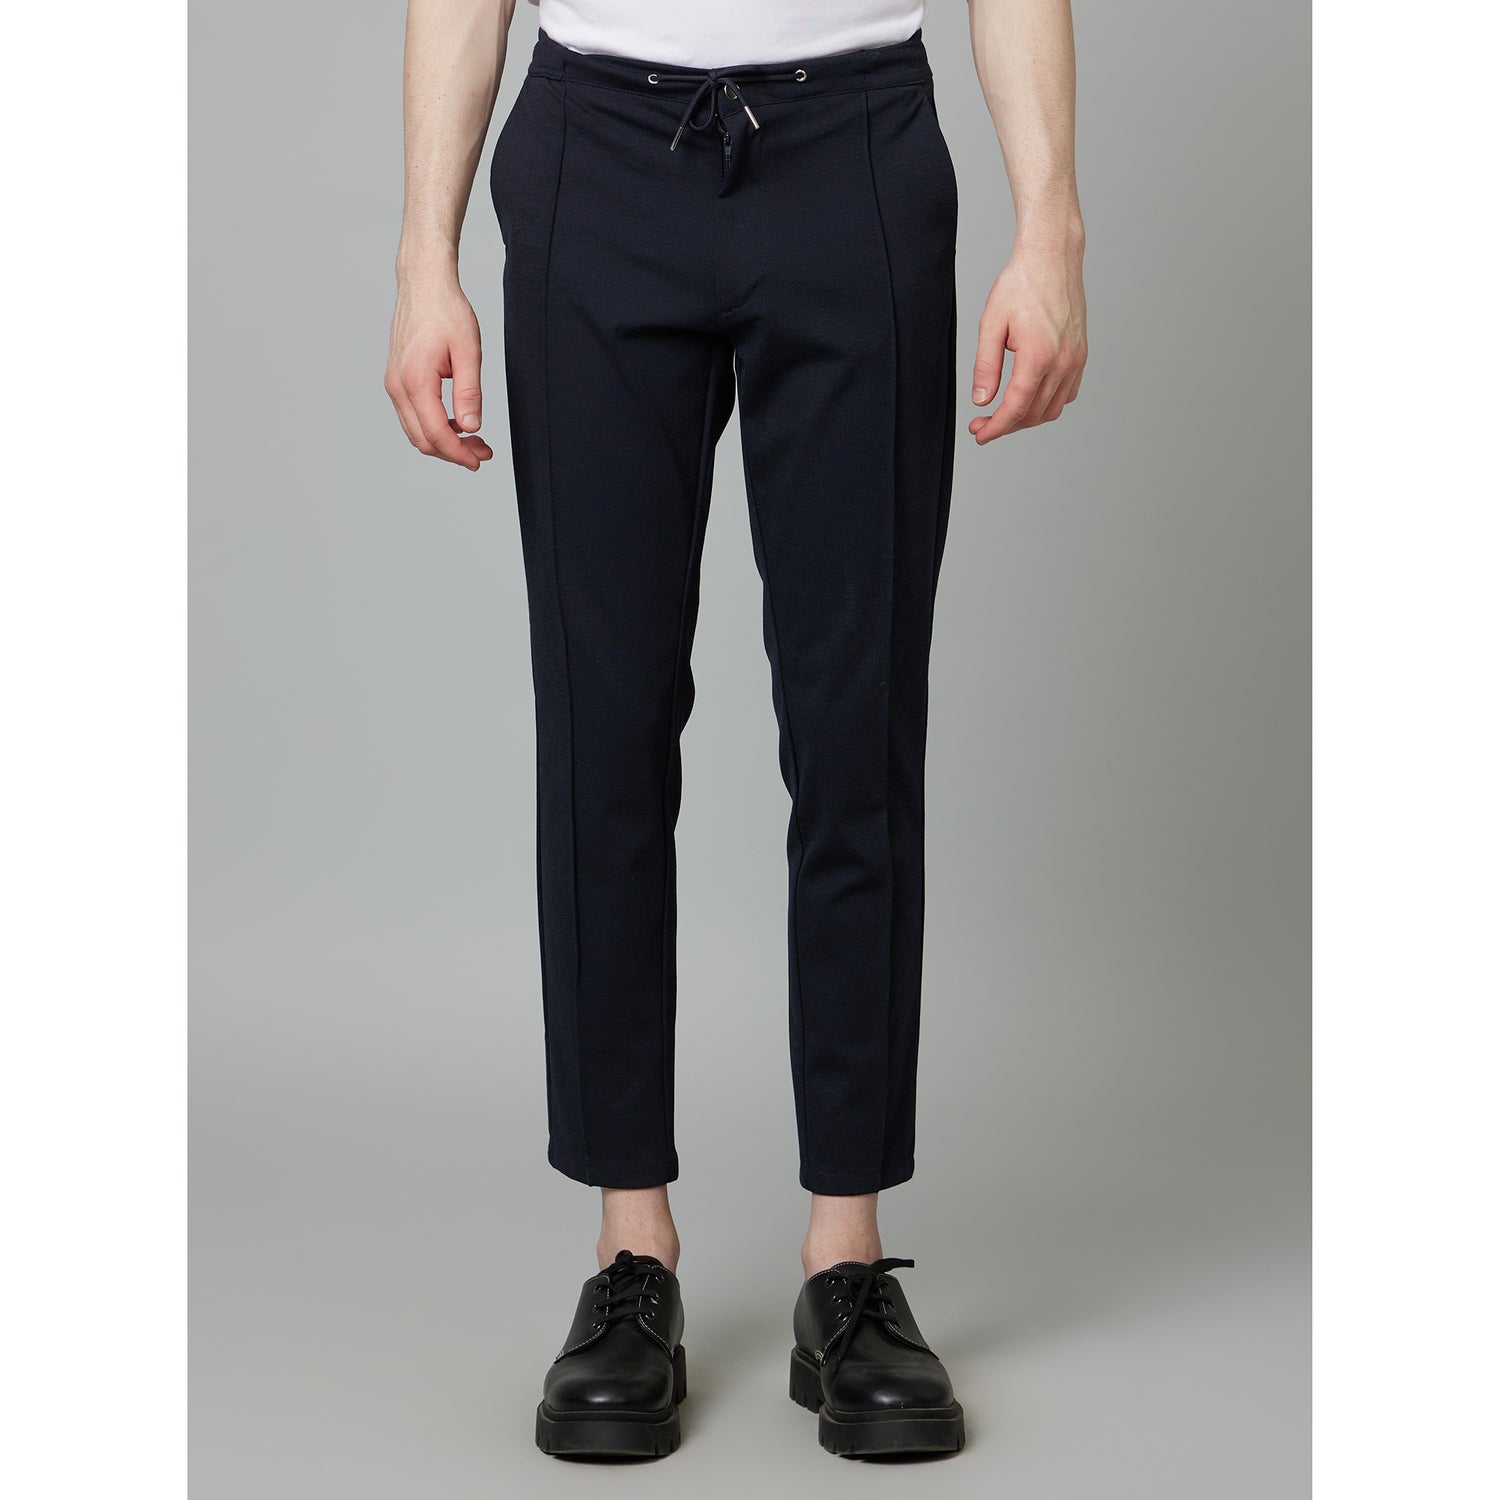 Navy Blue Mid-Rise Slim Fit Cropped Trousers (COBOZAL)